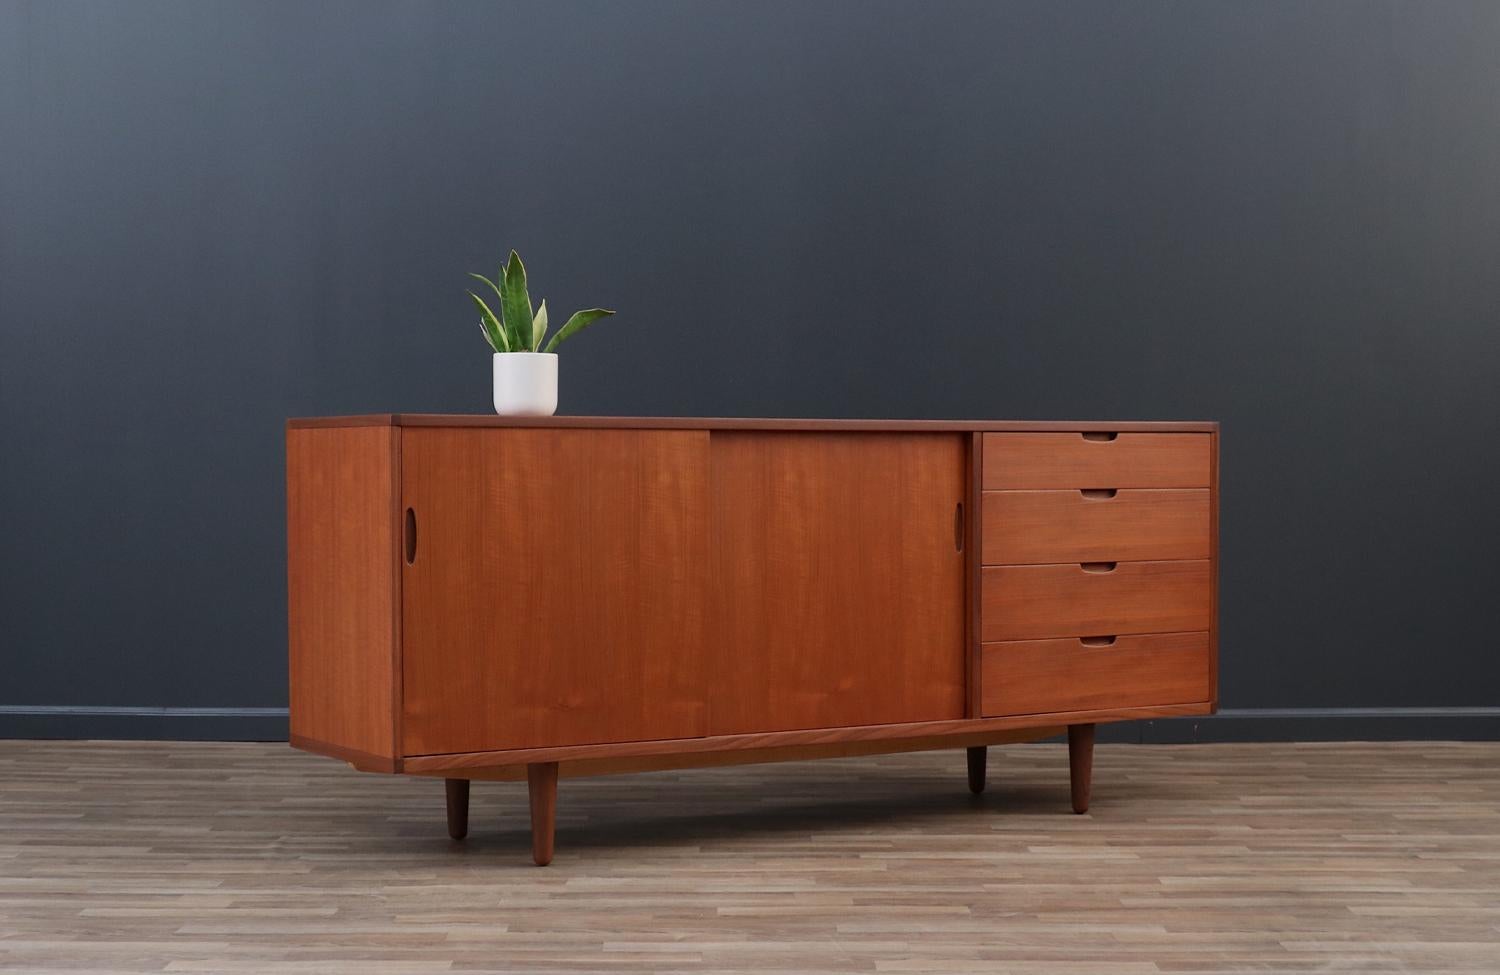 ________________________________________

Transforming a piece of Mid-Century Modern furniture is like bringing history back to life, and we take this journey with passion and precision. With over 17 years of artisanal expertise, our Los Angeles